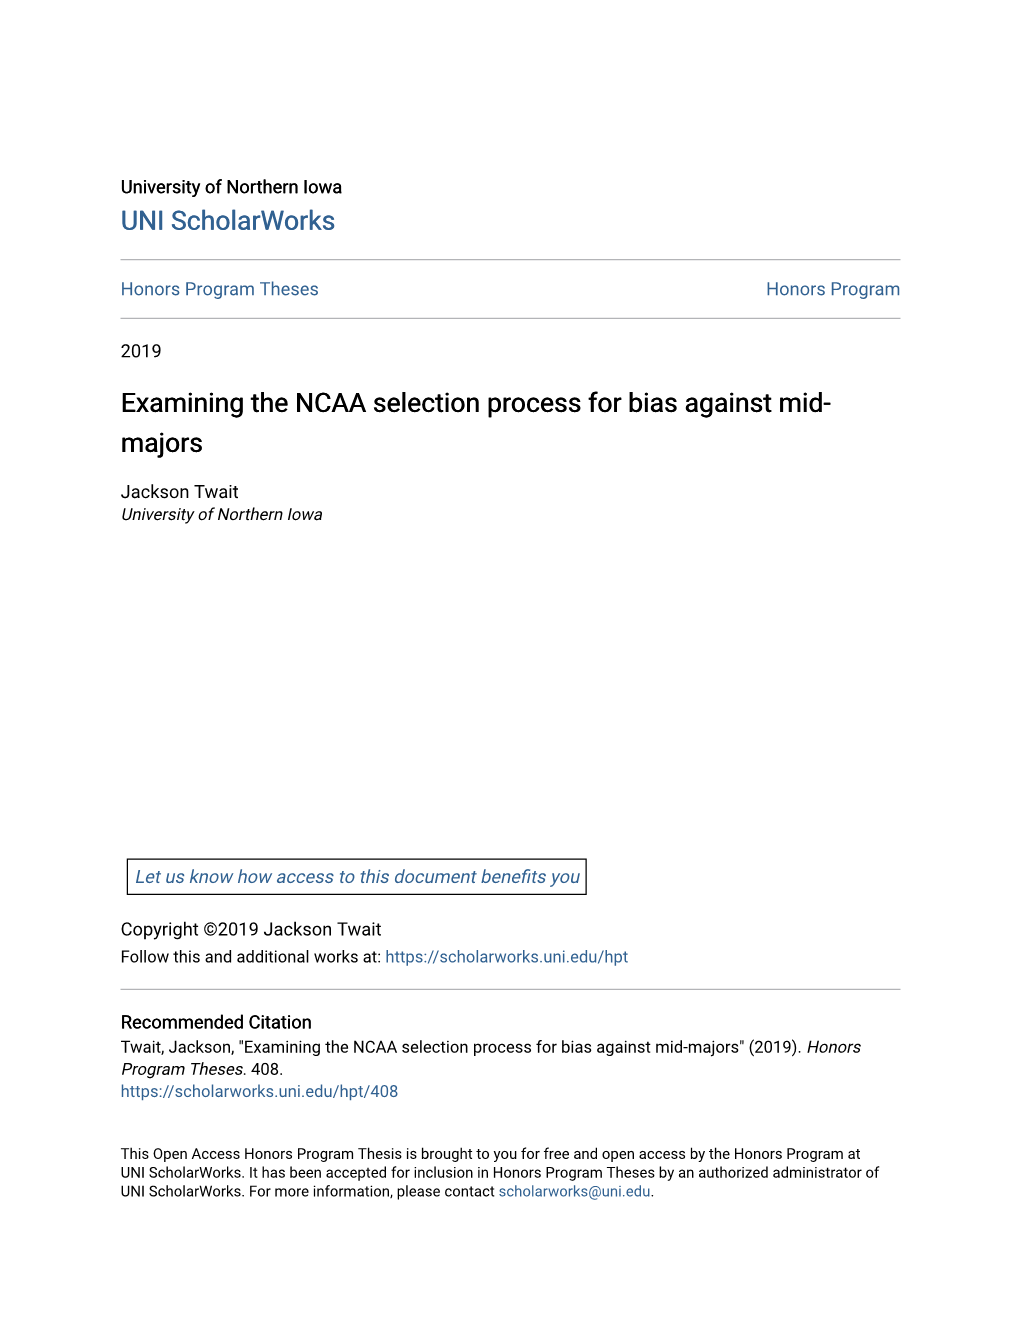 Examining the NCAA Selection Process for Bias Against Mid-Majors" (2019)